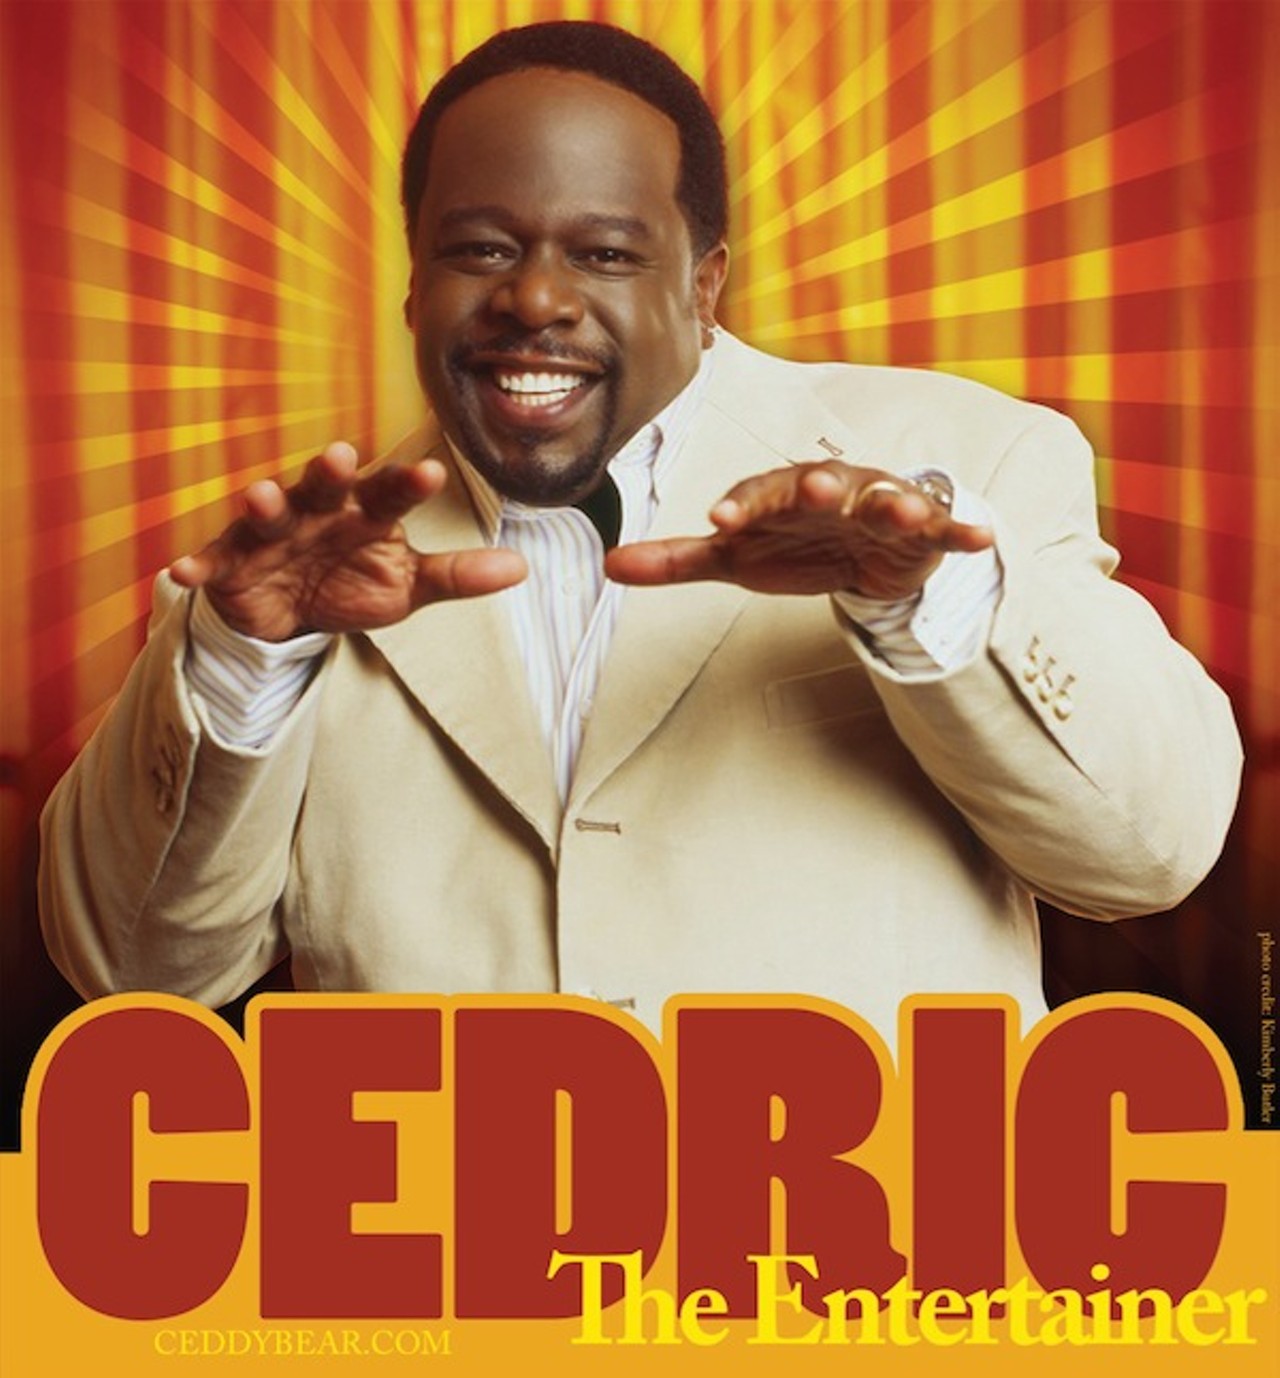 Cedric the Entertainer
Saturday, July 20
8 p.m.
Bob Carr Performing Arts Centre, 401 W. Livingston St.
407-849-2020
orlandovenues.net
$33-$63
He may be one of the Original Kings of Comedy, but after being in the business for nearly 15 years, Cedric the Entertainer knows how to keep up with the other budding princes and princesses of comedy &#150; a group of comics, he says, &#147;with their own brand,&#148; the likes of Kevin Hart and Russell Peters. He&#146;s done so by staying busy, appearing both on TV (The Steve Harvey Show, The Soul Man) and on the big screen (Barbershop, Johnson Family Vacation). He also understands and readily embraces the demand for growth, which is part of why he&#146;ll be replacing Meredith Vieira as game show host of the 12th season of Who Wants to Be a Millionaire this fall. As host, Cedric tells us he brings &#147;humor, charm, extreme good looks &#133; and a sense of familiarity&#148; to the show. Word is more dramatic roles might be in the works for Cedric, but for this week&#146;s show in Orlando, he&#146;ll stick to the usual funny stuff. He&#146;ll probably show up in typical hat-and-suit Cedric fashion, and with all of his voice-over experience, we could bet he&#146;ll bring along a celebrity impersonation or two. &#150; Aimee Vitek